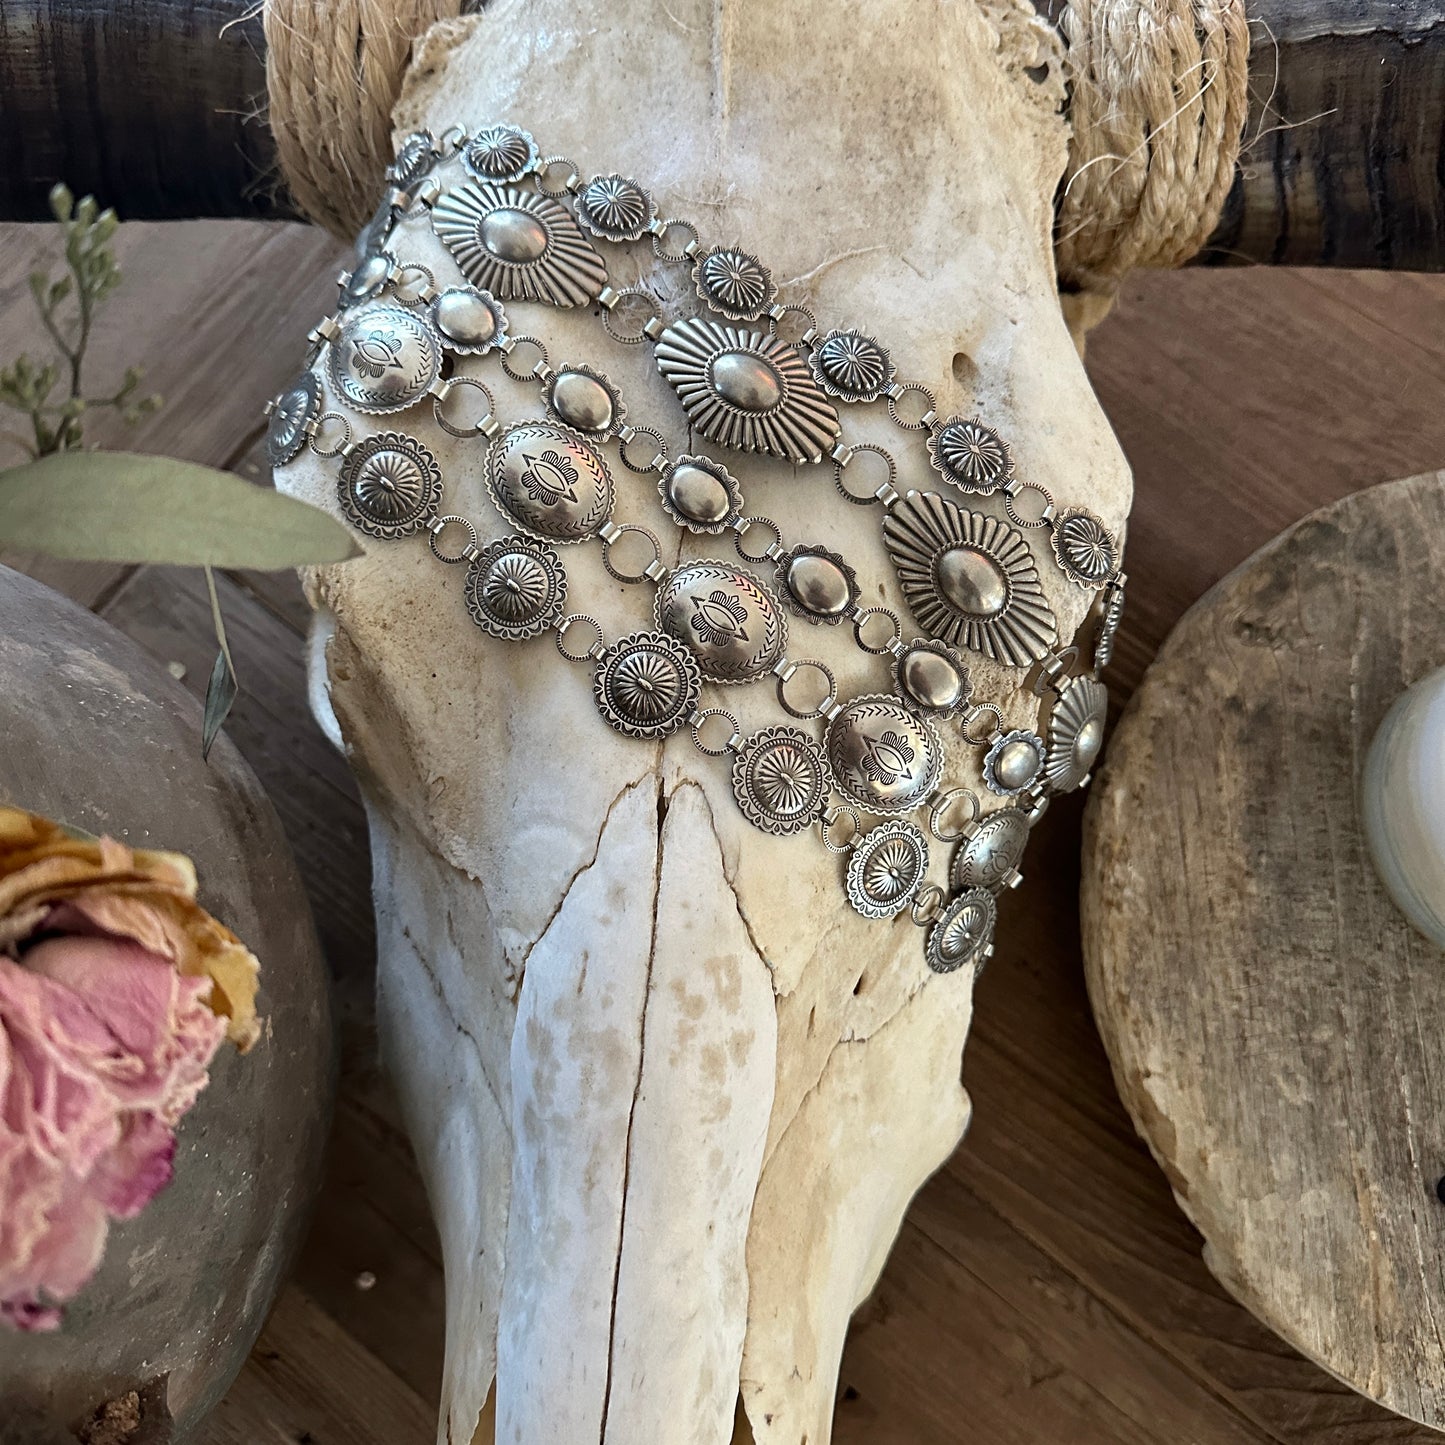 Nickel concho belts draped over a cow skull as coffee table decor